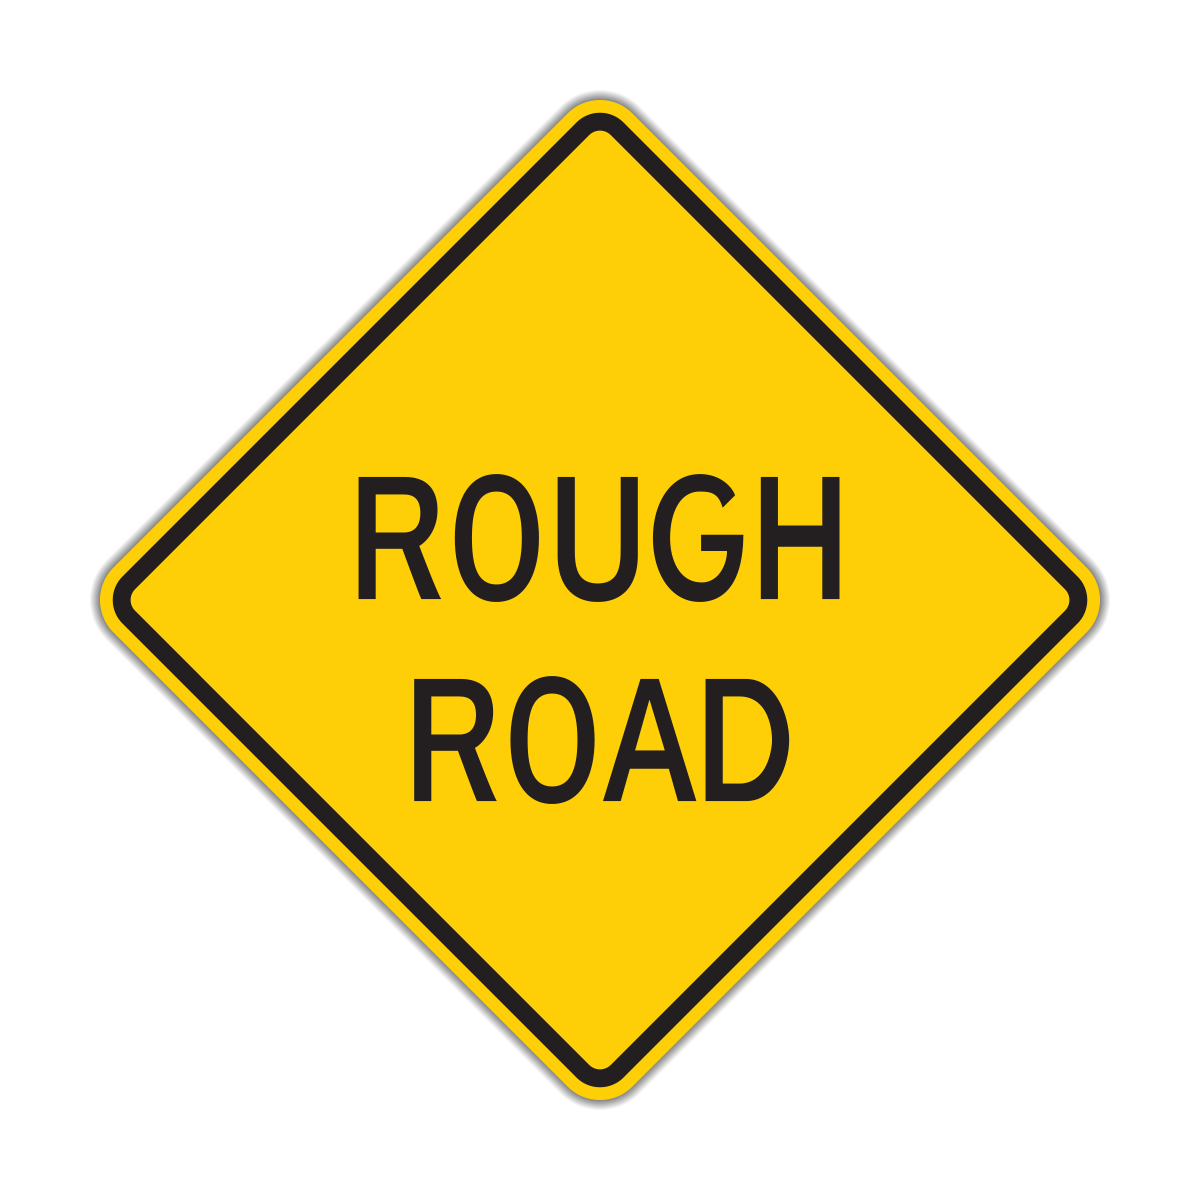 Rough Road Warning Sign (W8-8)